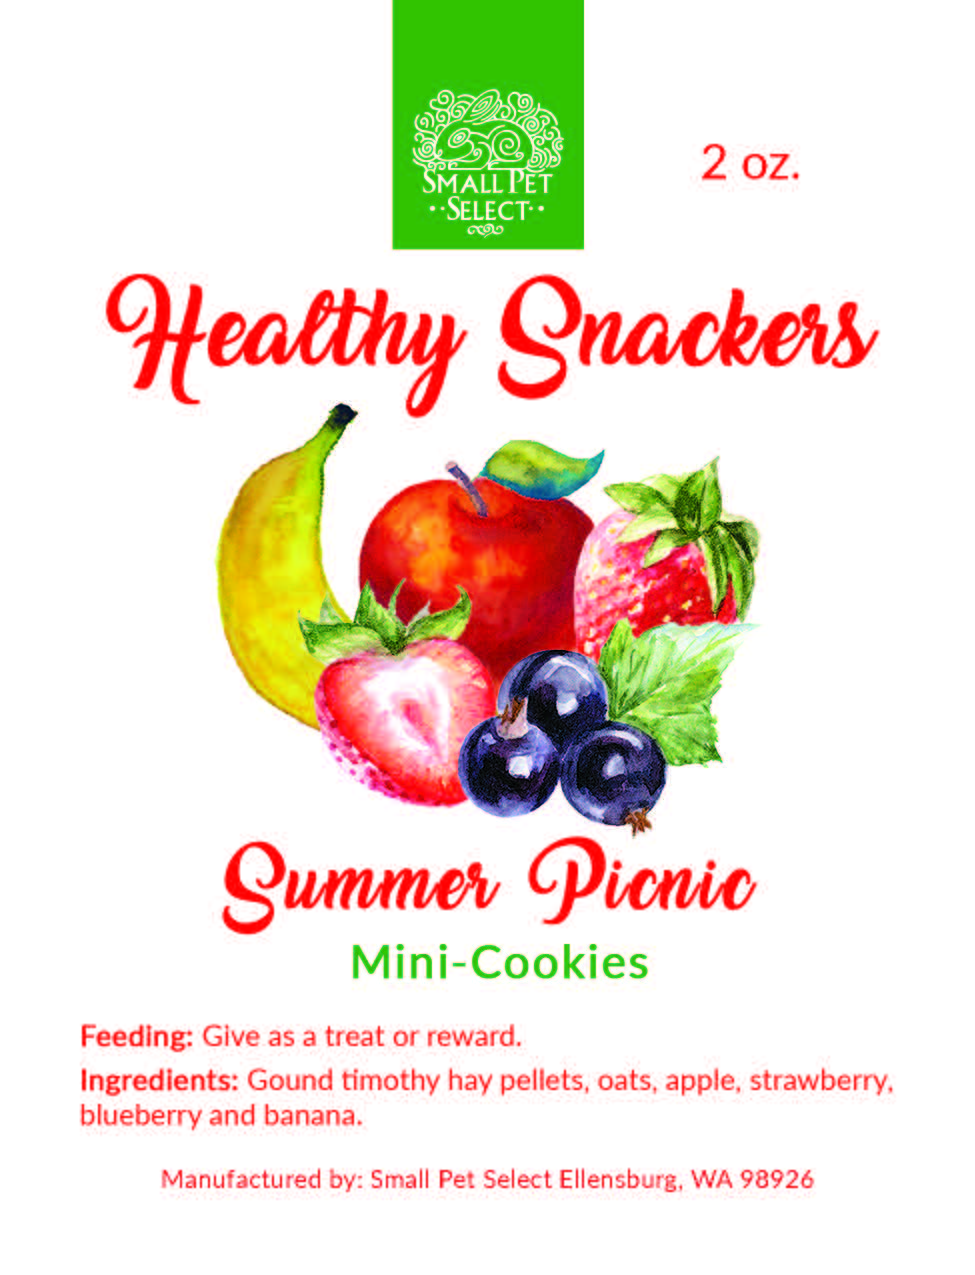 Summer Picnic Healthy Snackers